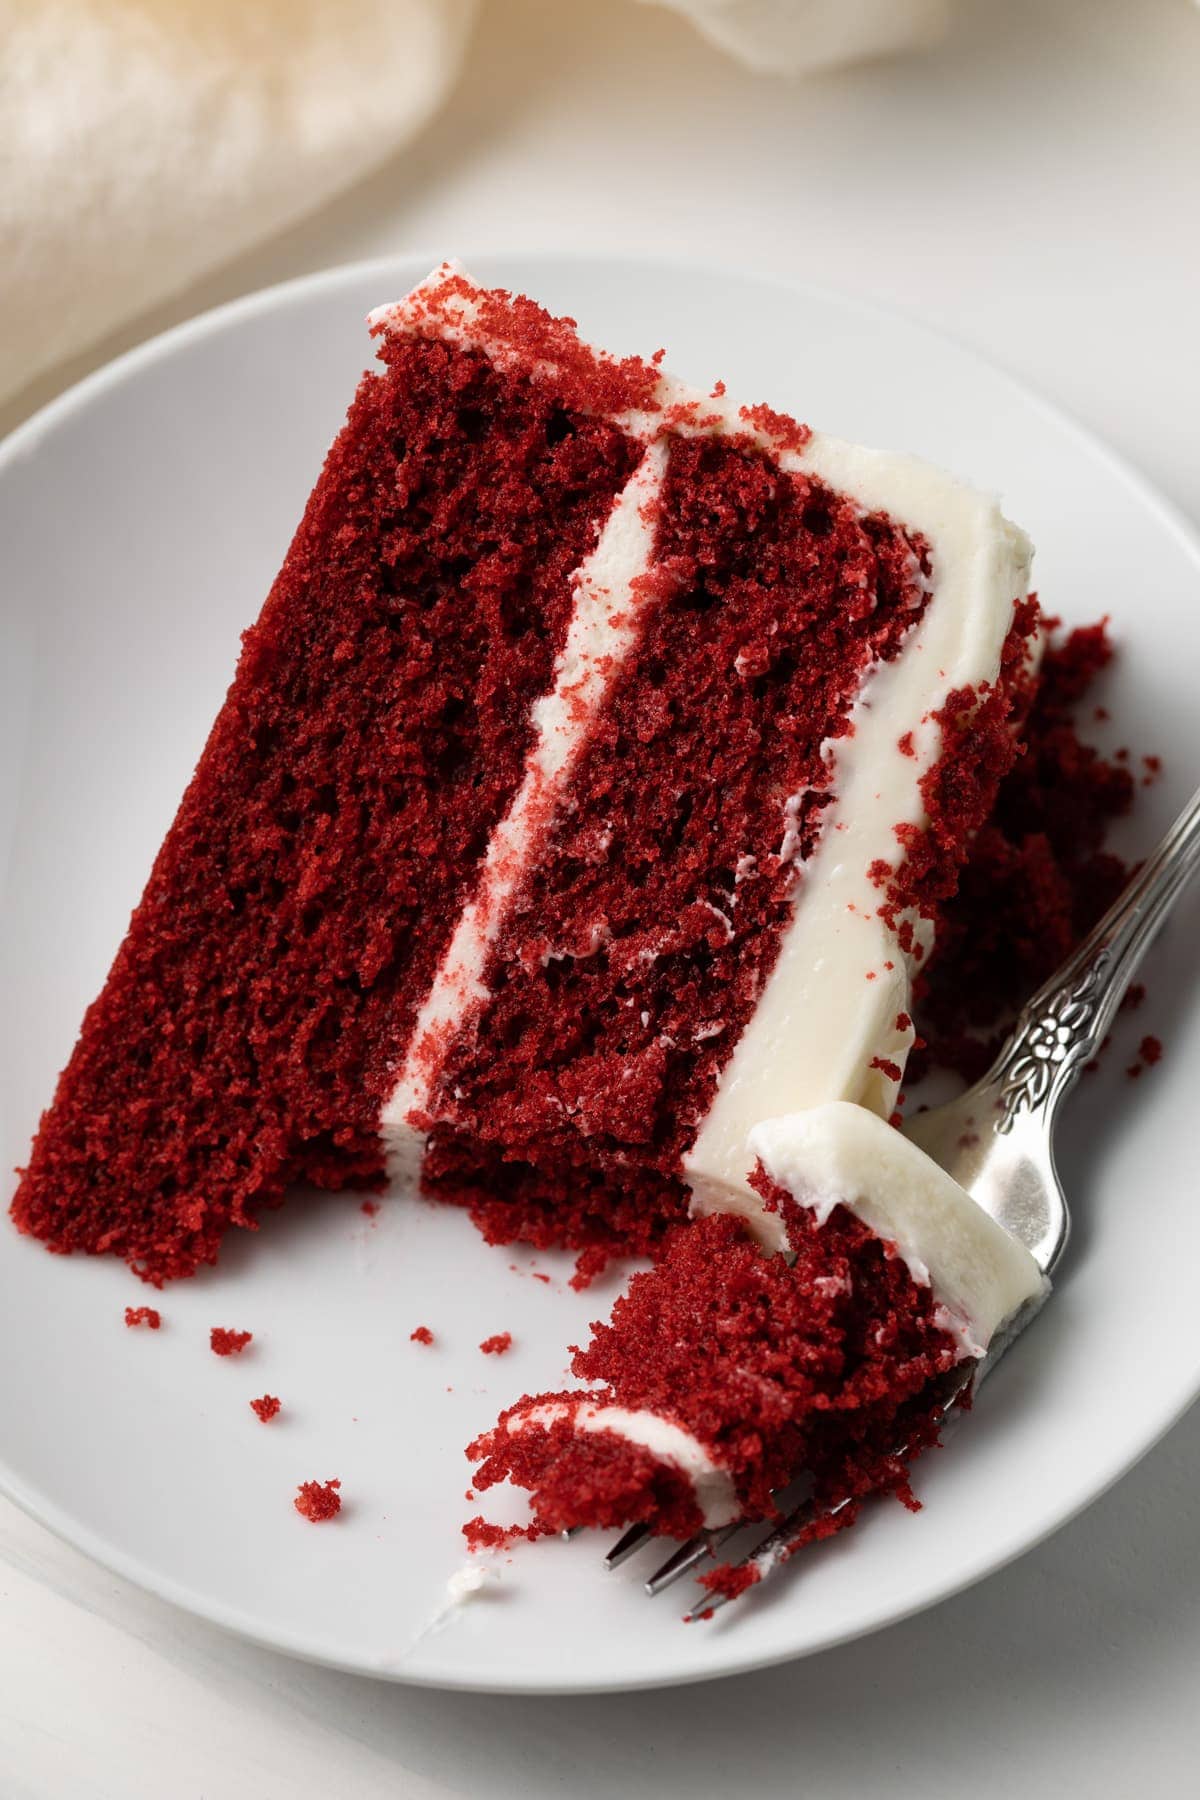 Slice of red velvet cake with a fork taking a bite out.